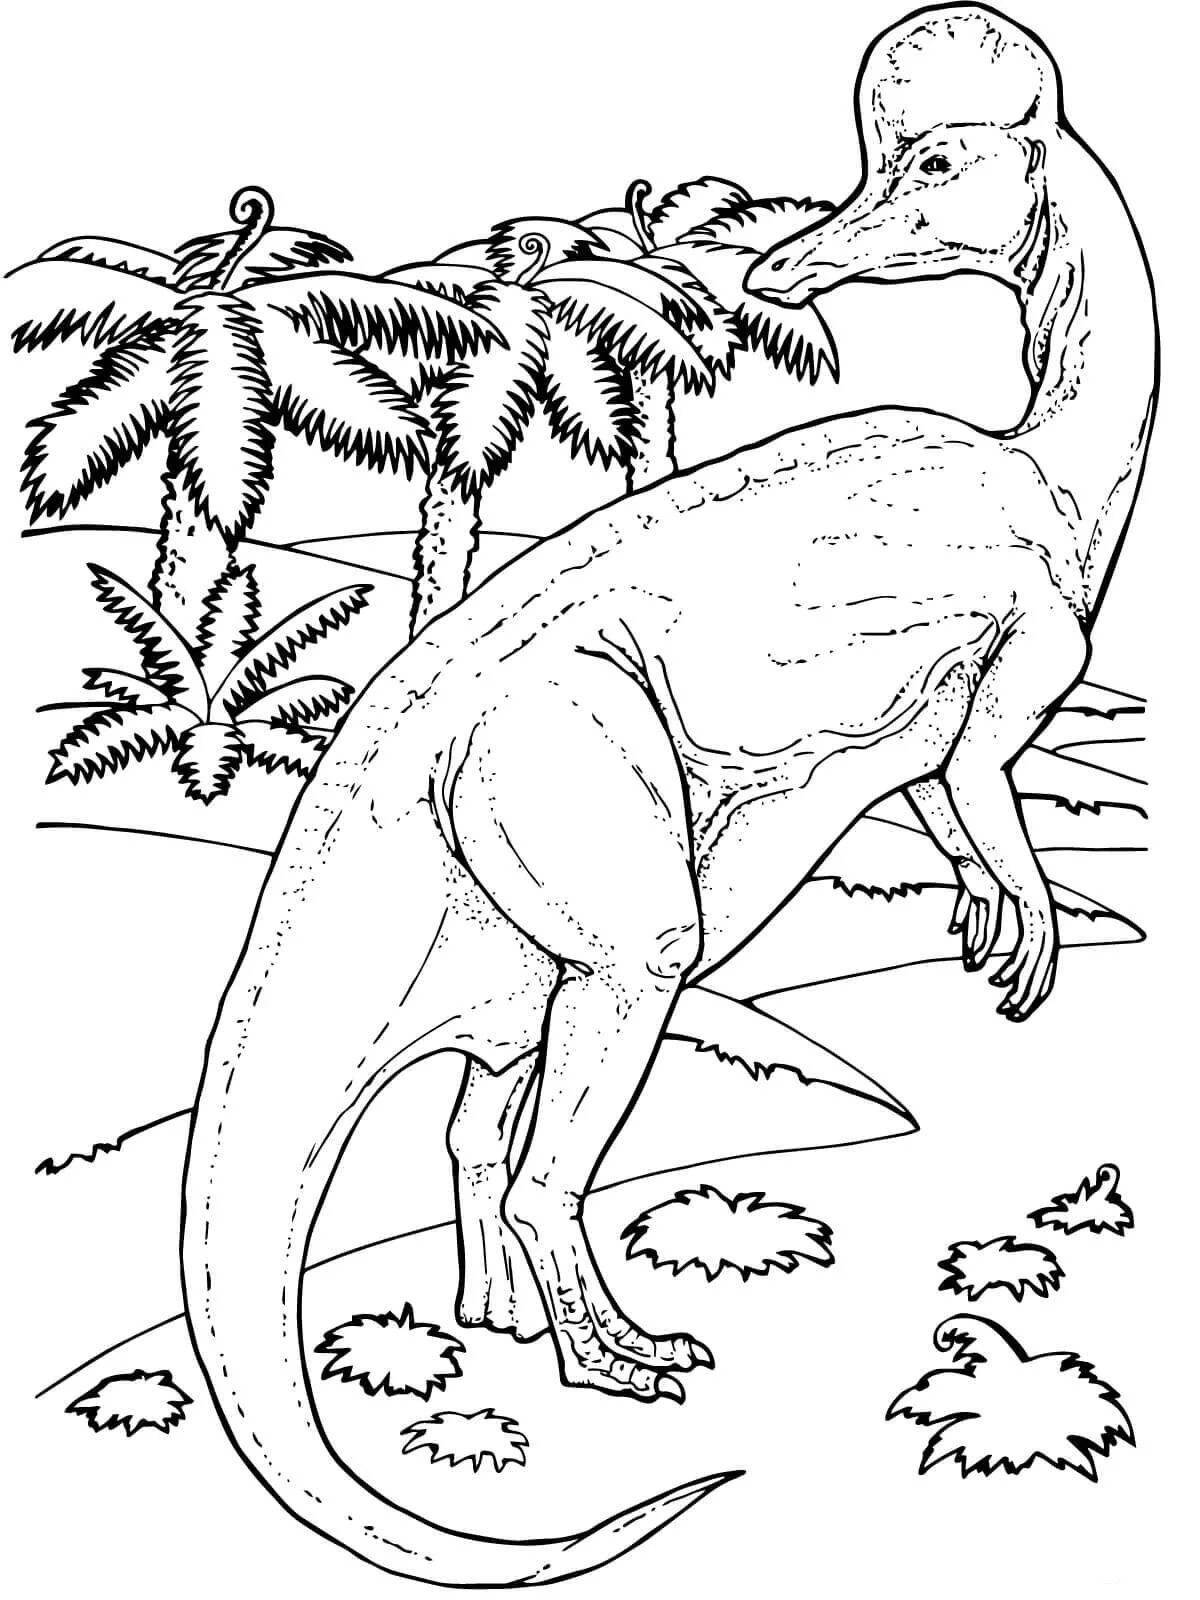 Awesome Jurassic Park coloring pages for kids